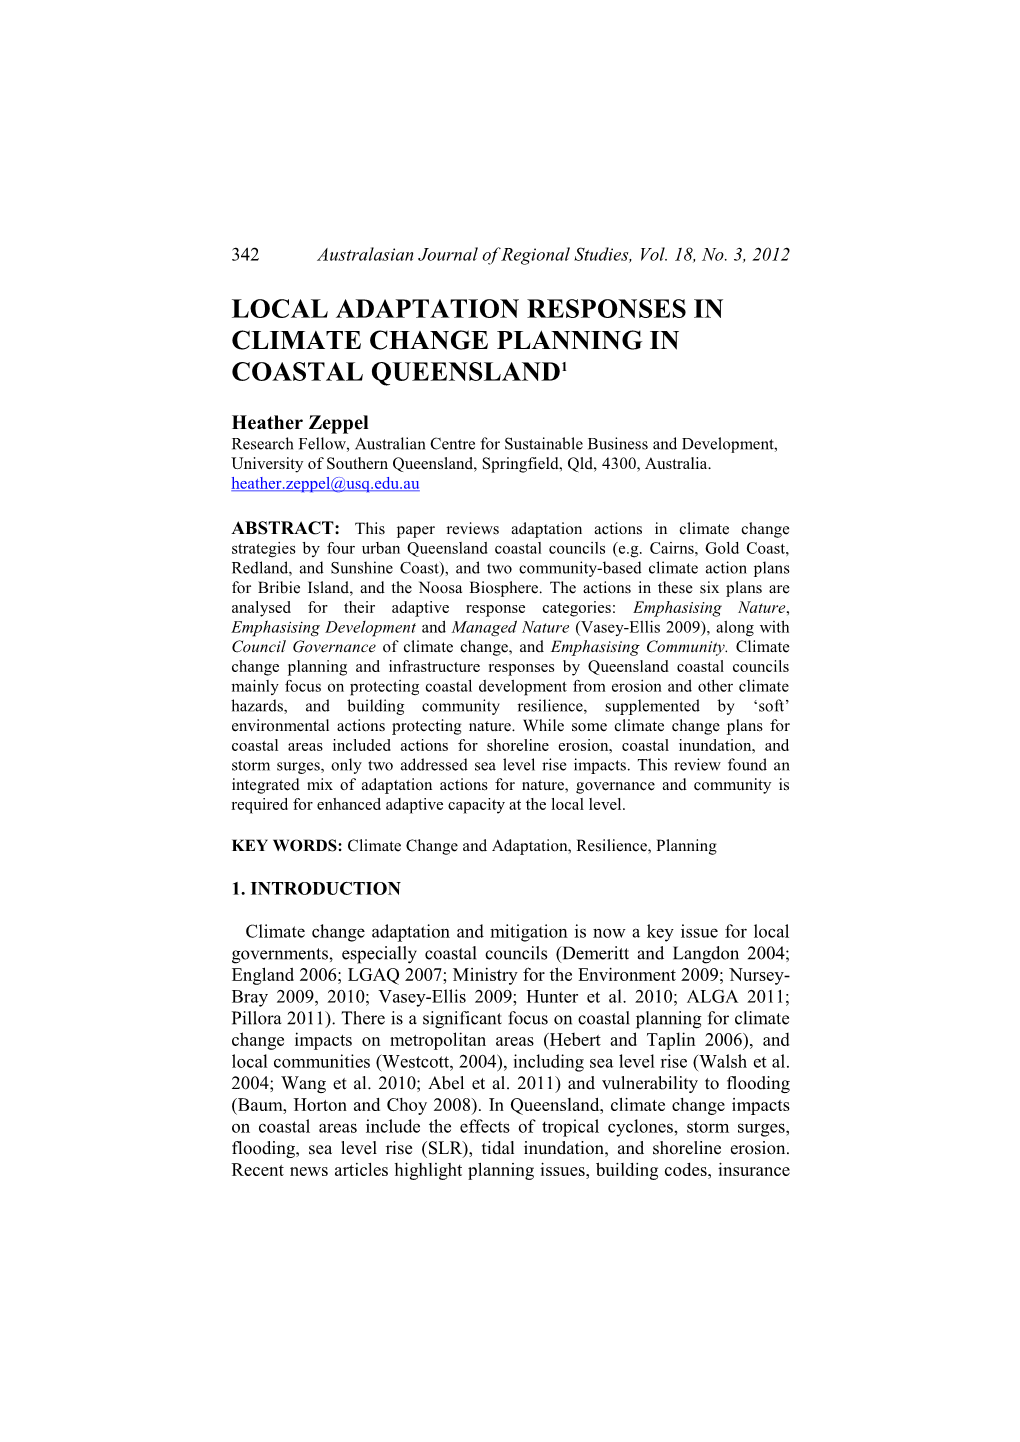 Local Adaptation Responses in Climate Change Planning in Coastal Queensland1